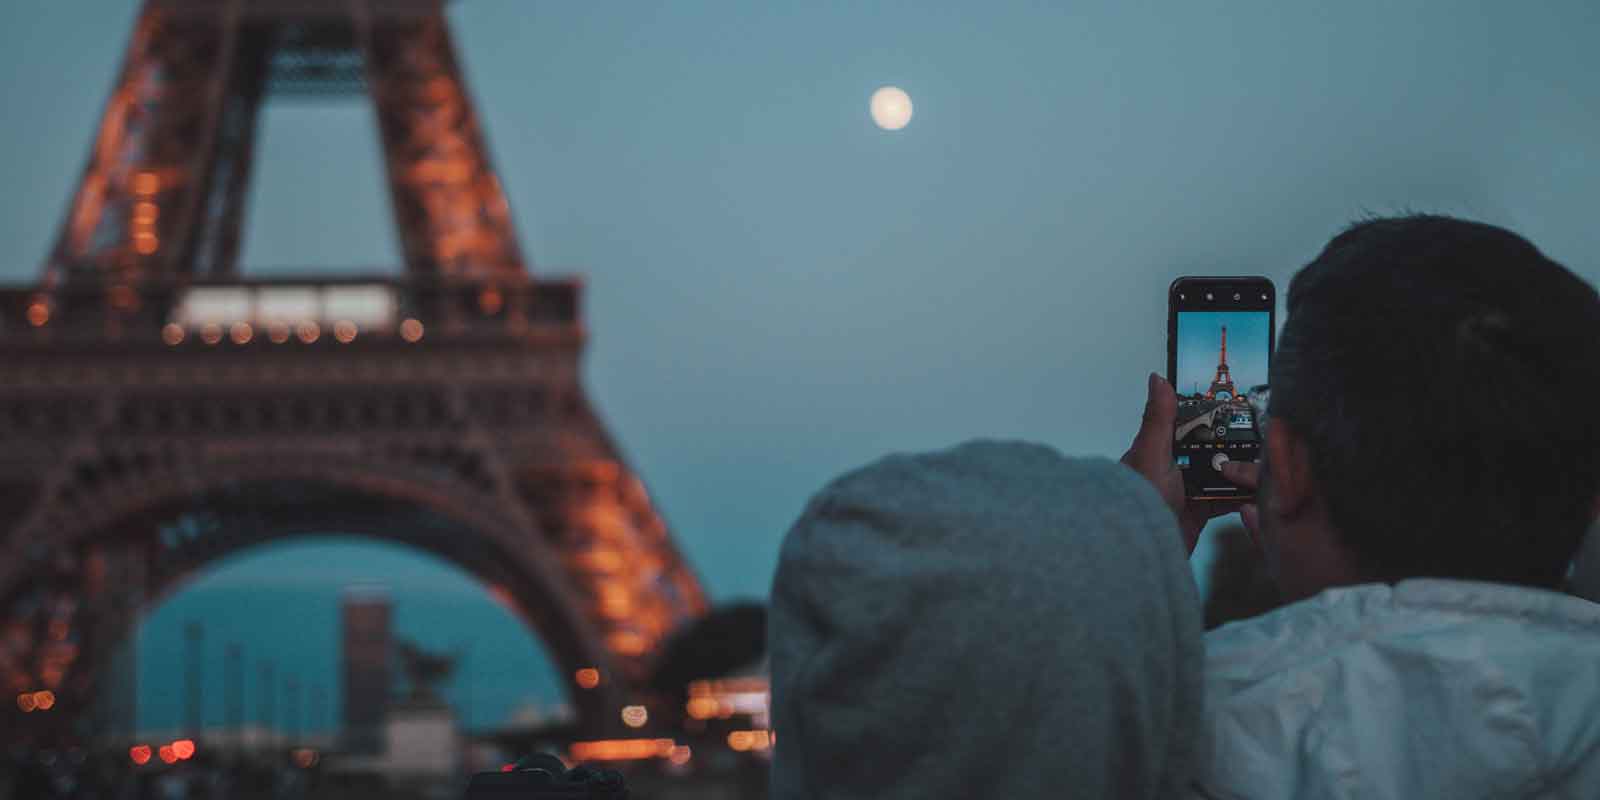 Photo of a man taking a photo of the Eiffel Tower with a smartphone camera.